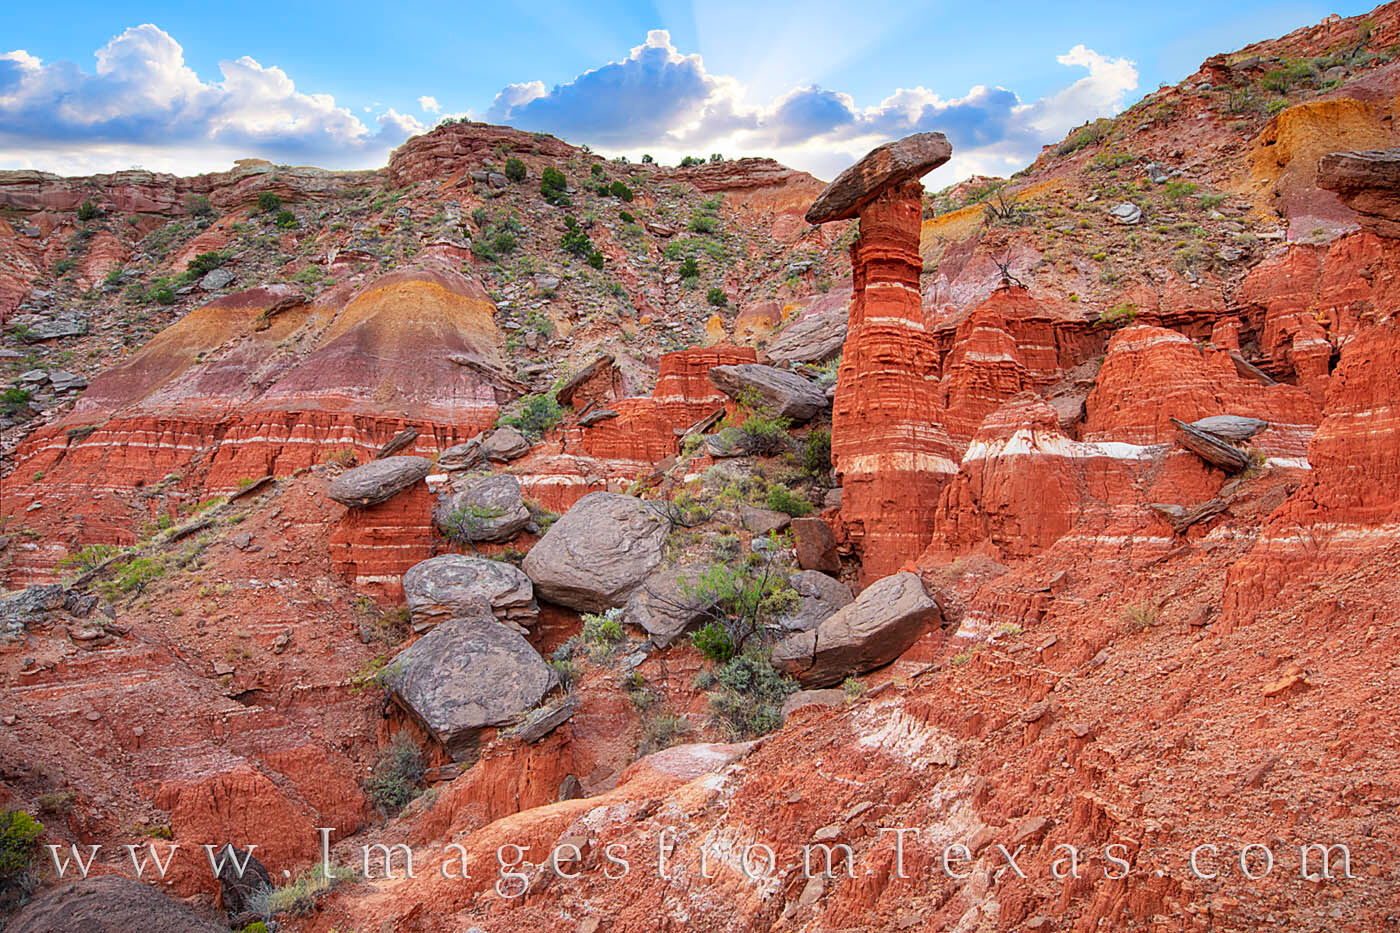 The iconic Devil’s Tombstone sits just off the Givens, Spicer, Lowry (GSL) Trail in Palo Duro Canyon. A hoodoo that balances...